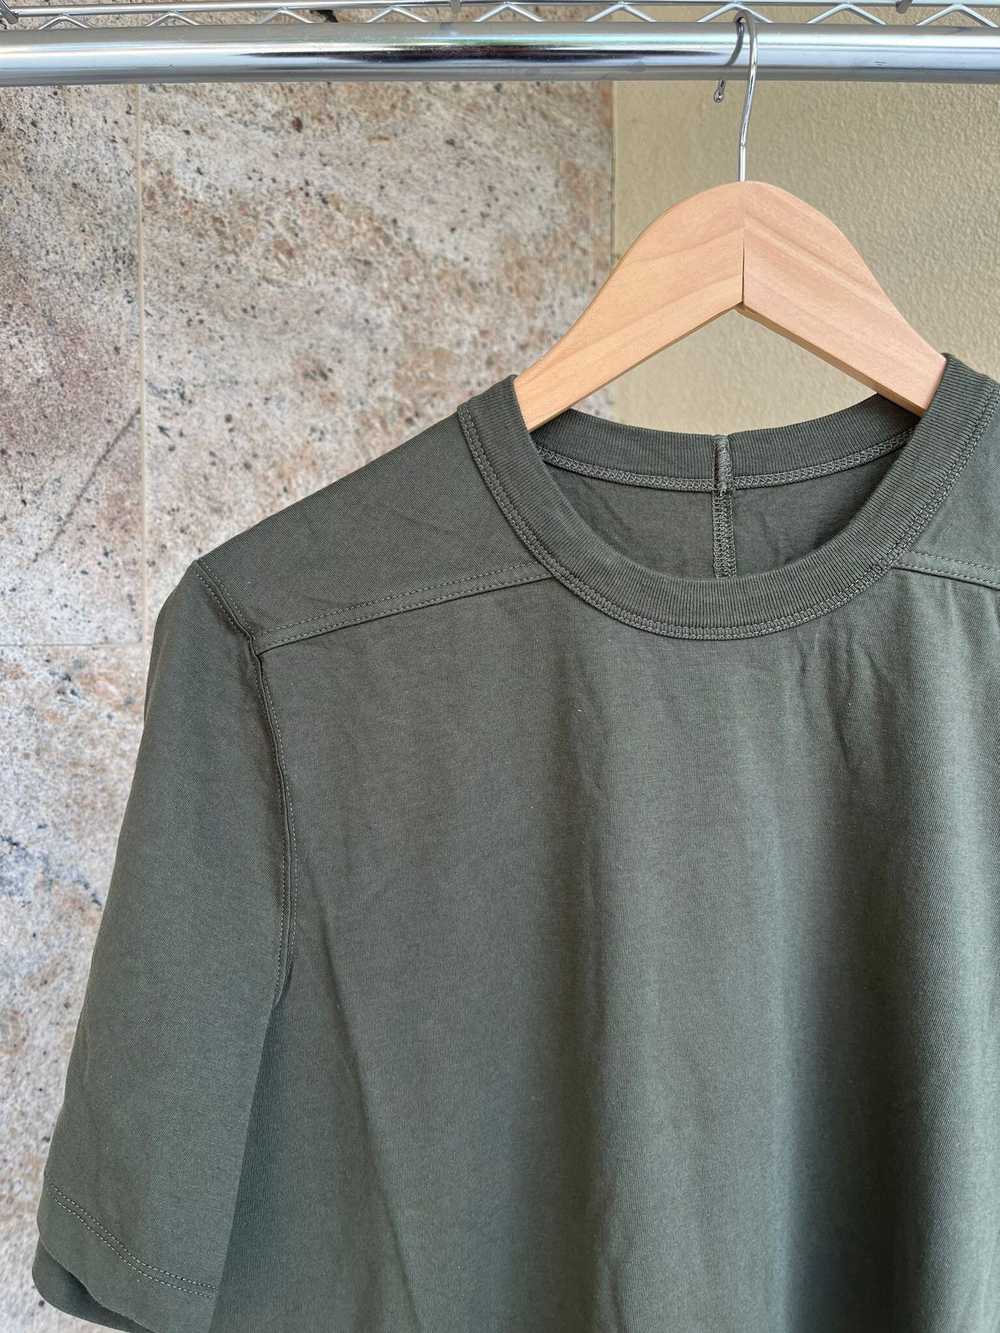 Rick Owens Mainline Level T-Shirt in Green - image 4